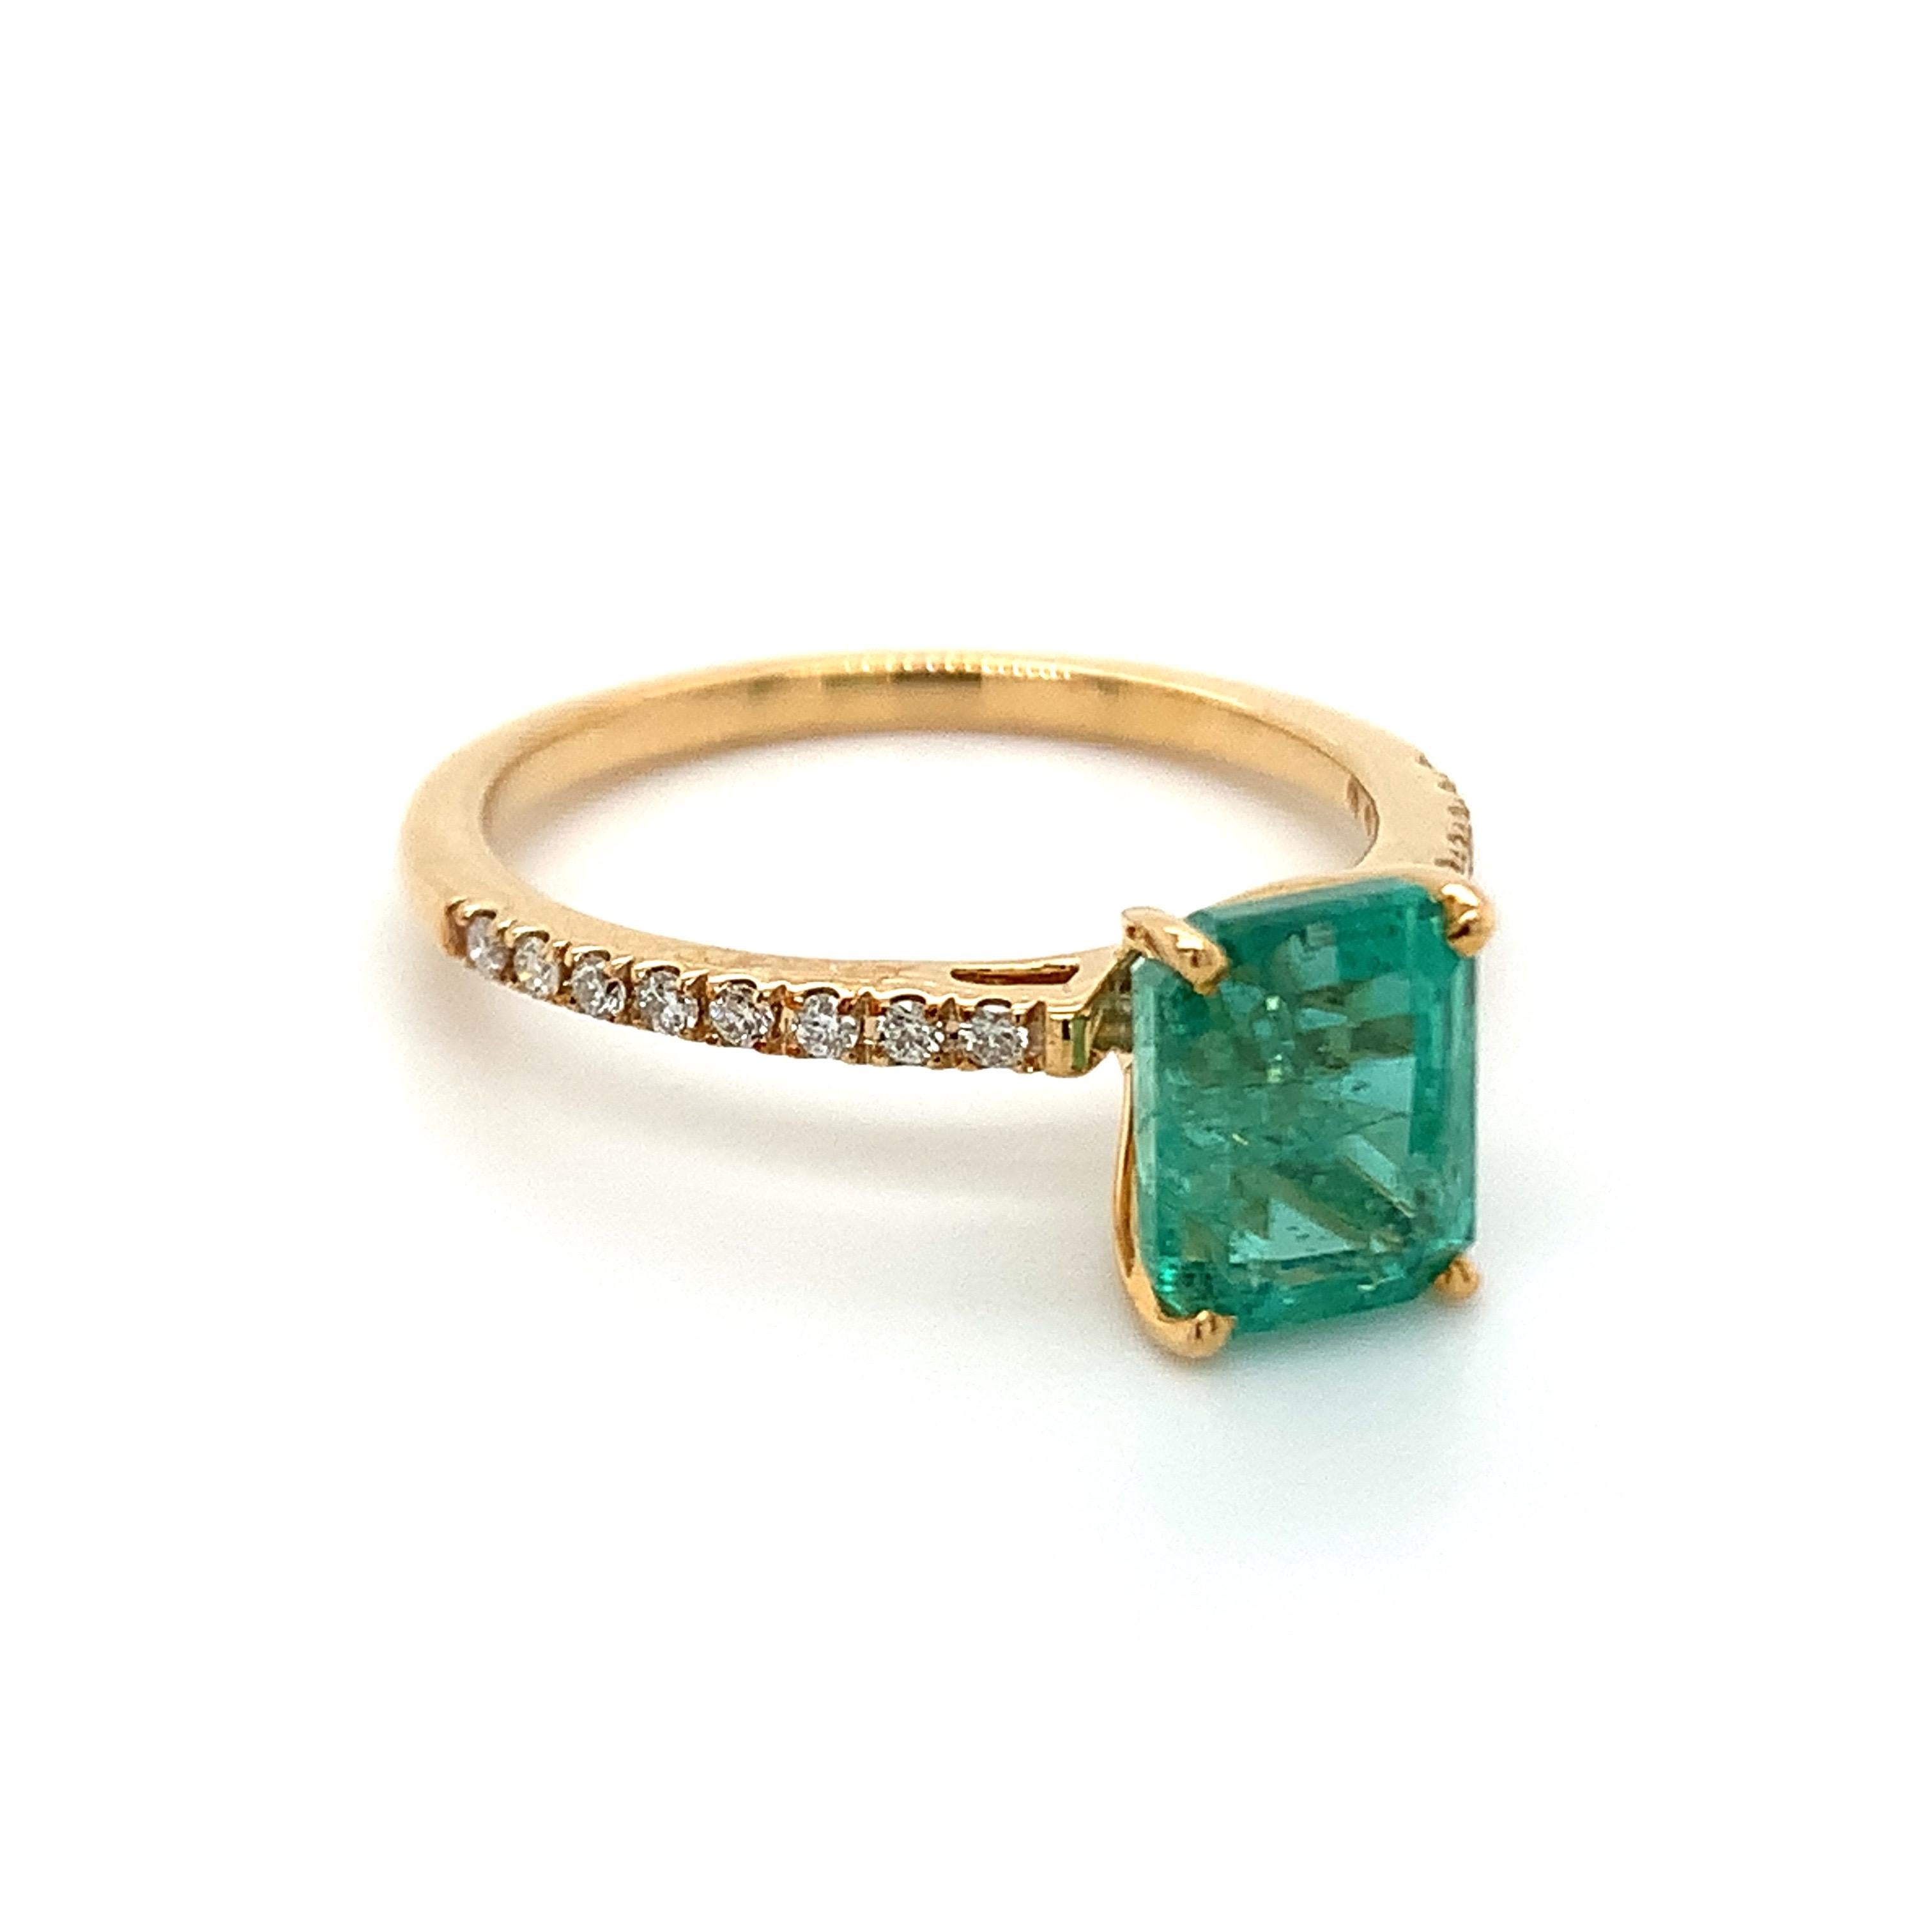 Octagon cut emerald gemstone beautifully crafted in a 10K yellow gold ring with natural diamonds.

With a vibrant green color hue. The birthstone for May is a symbol of renewed spring growth. Explore a vast range of precious stone Jewelry in our